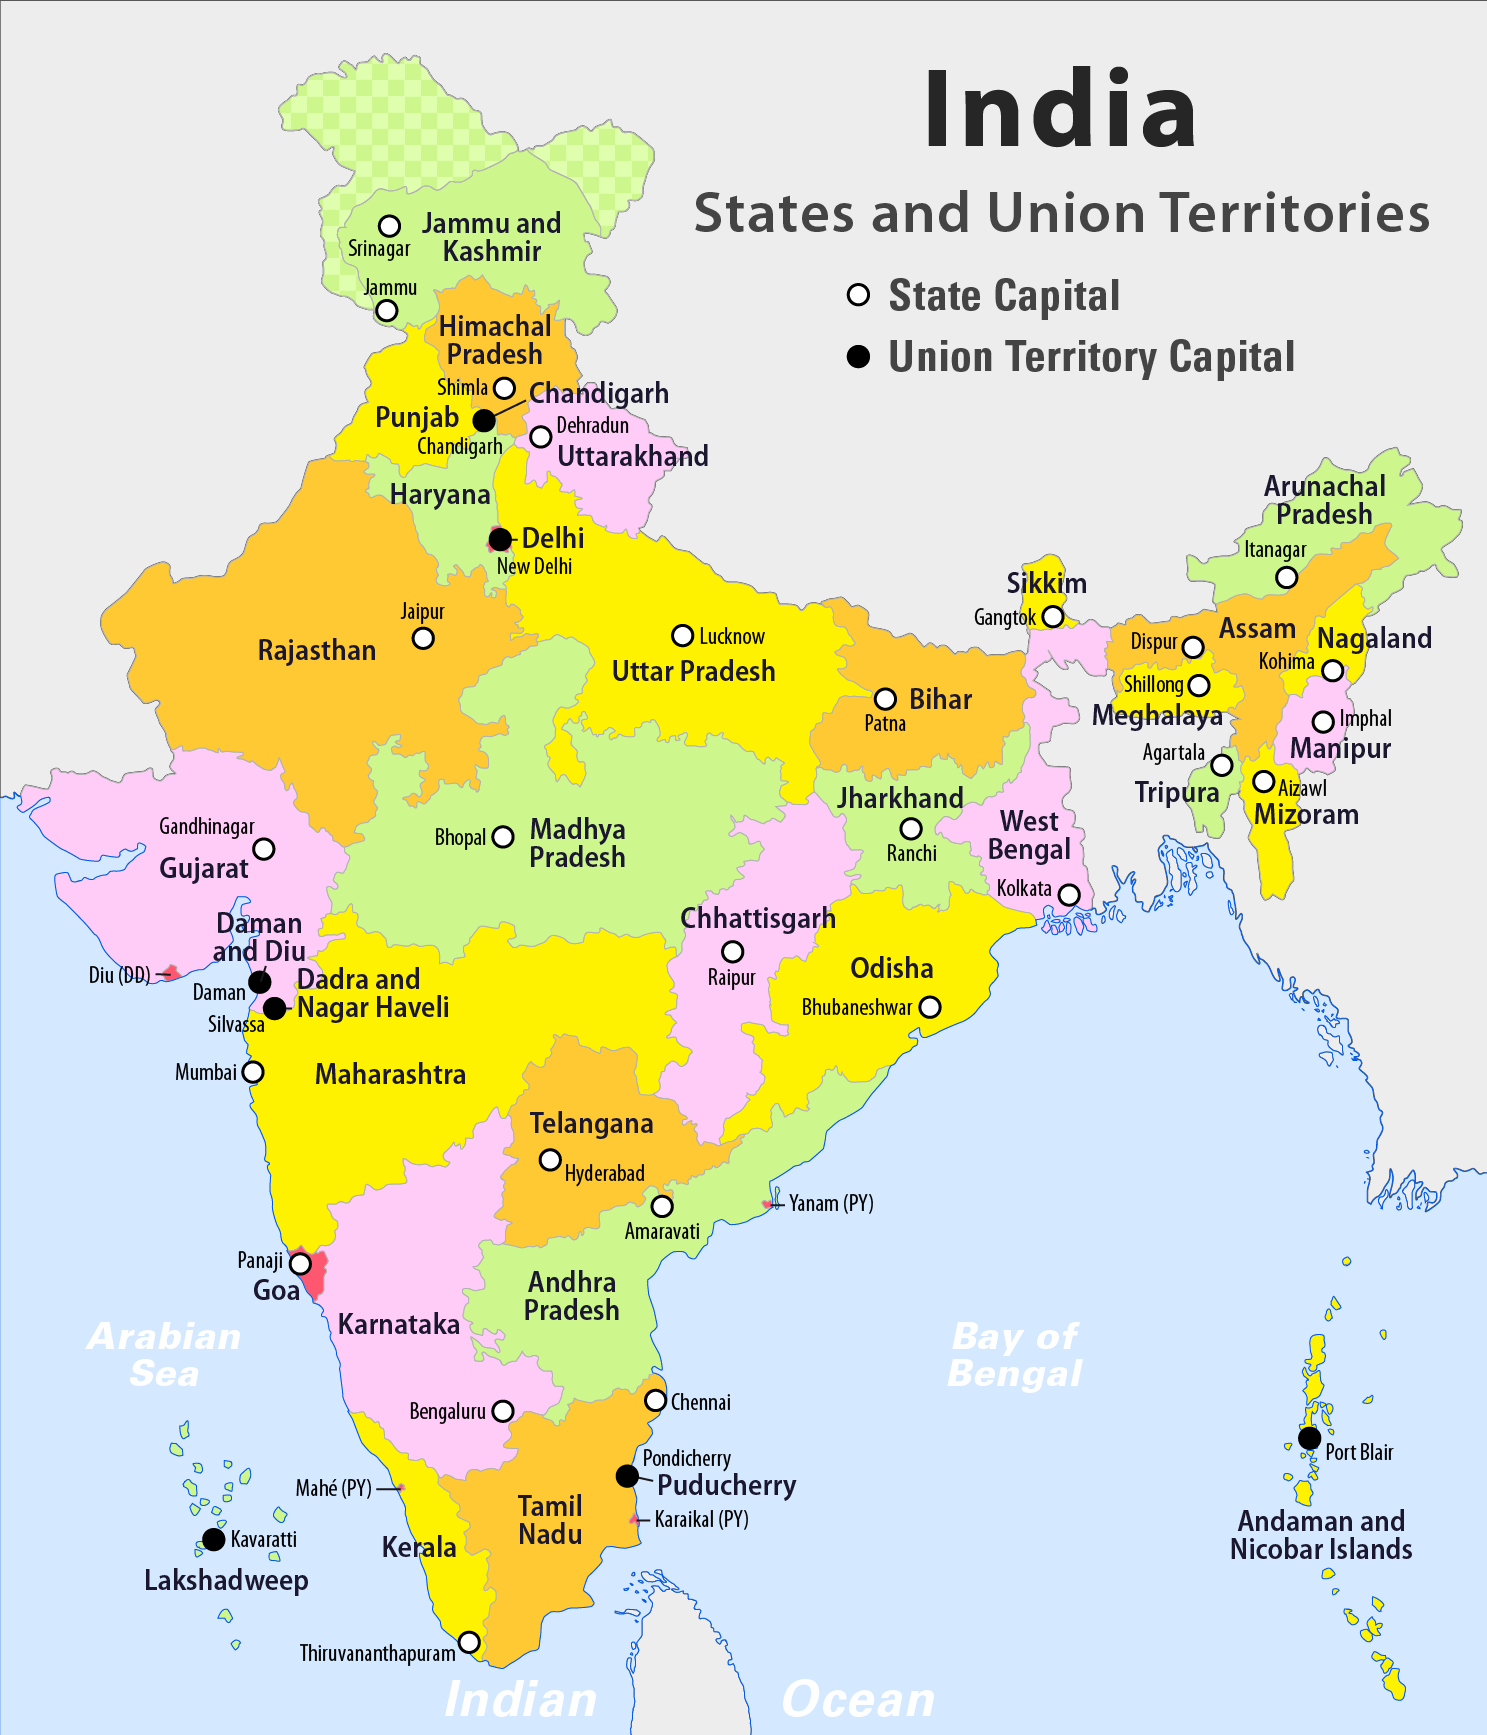 image-india-administrative-map-png-india-fandom-powered-by-wikia